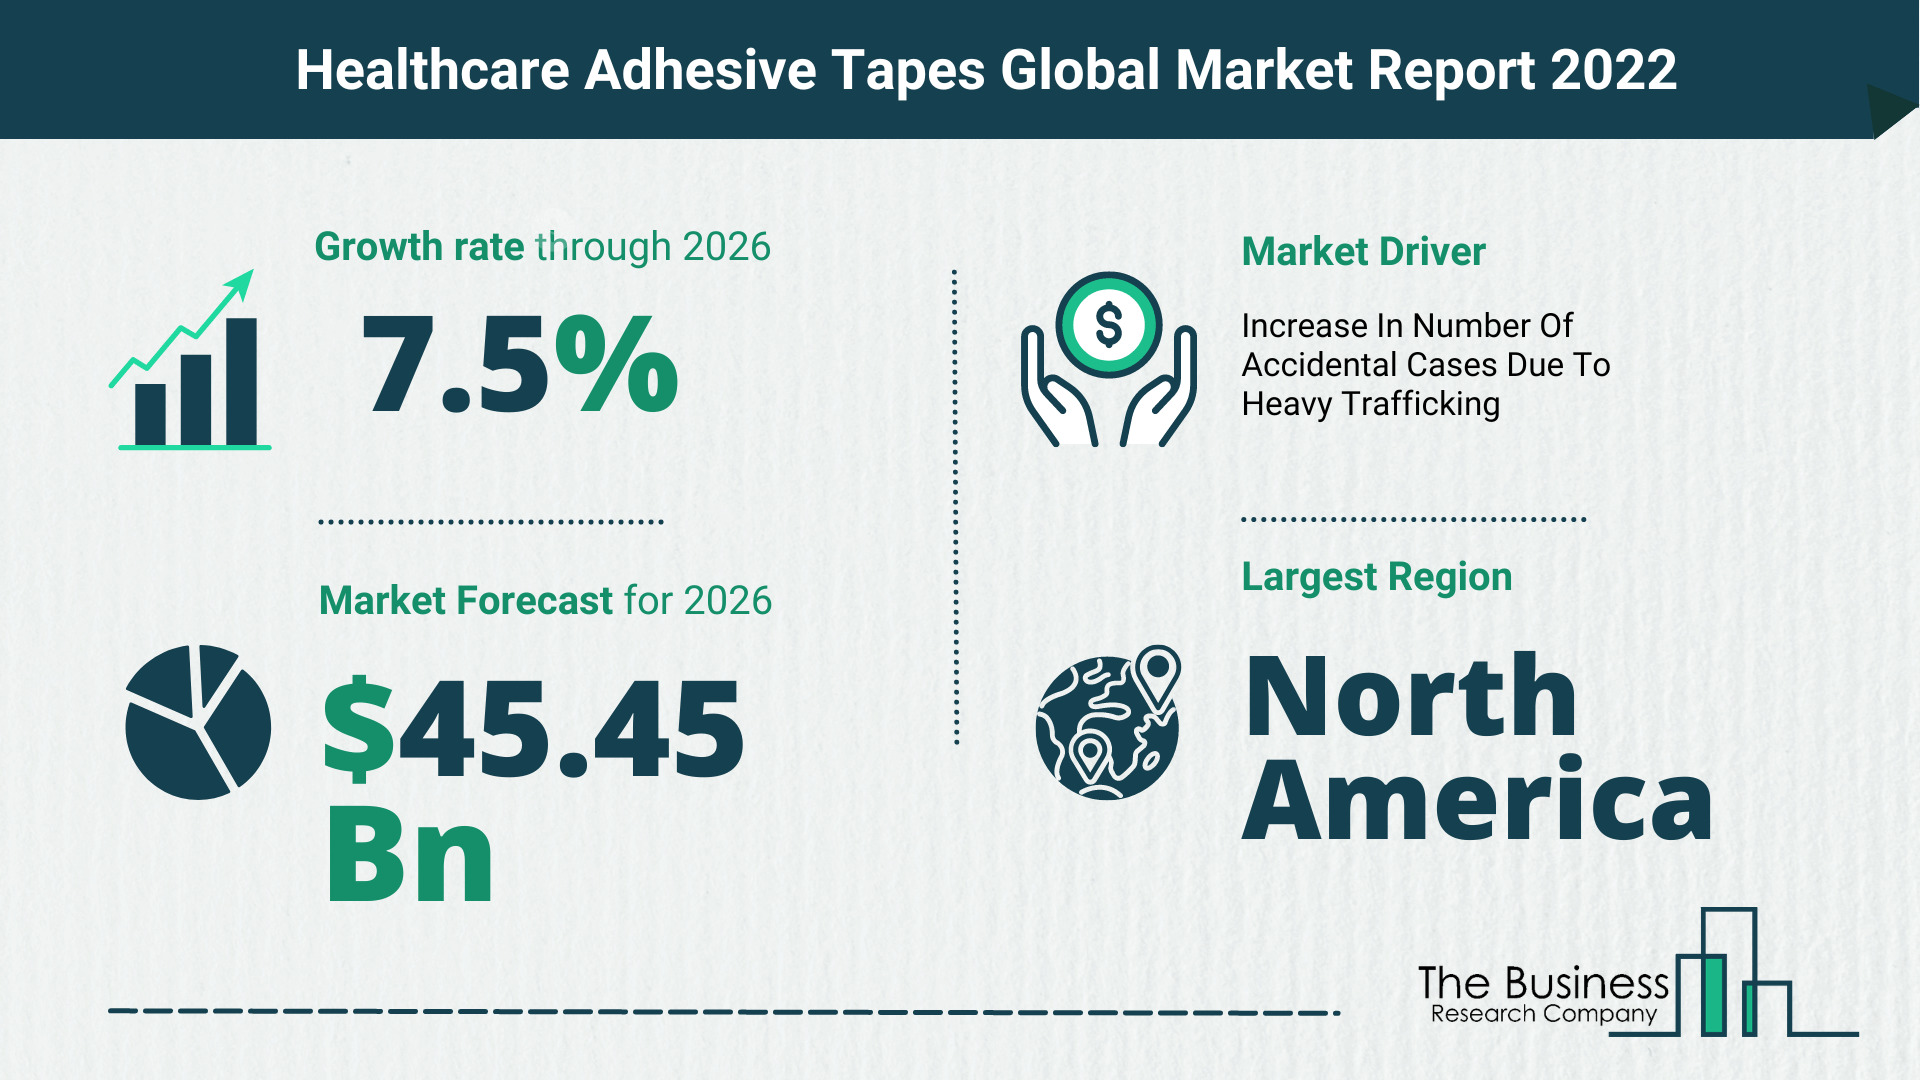 The Healthcare Adhesive Tapes Market Share, Market Size, And Growth Rate 2022